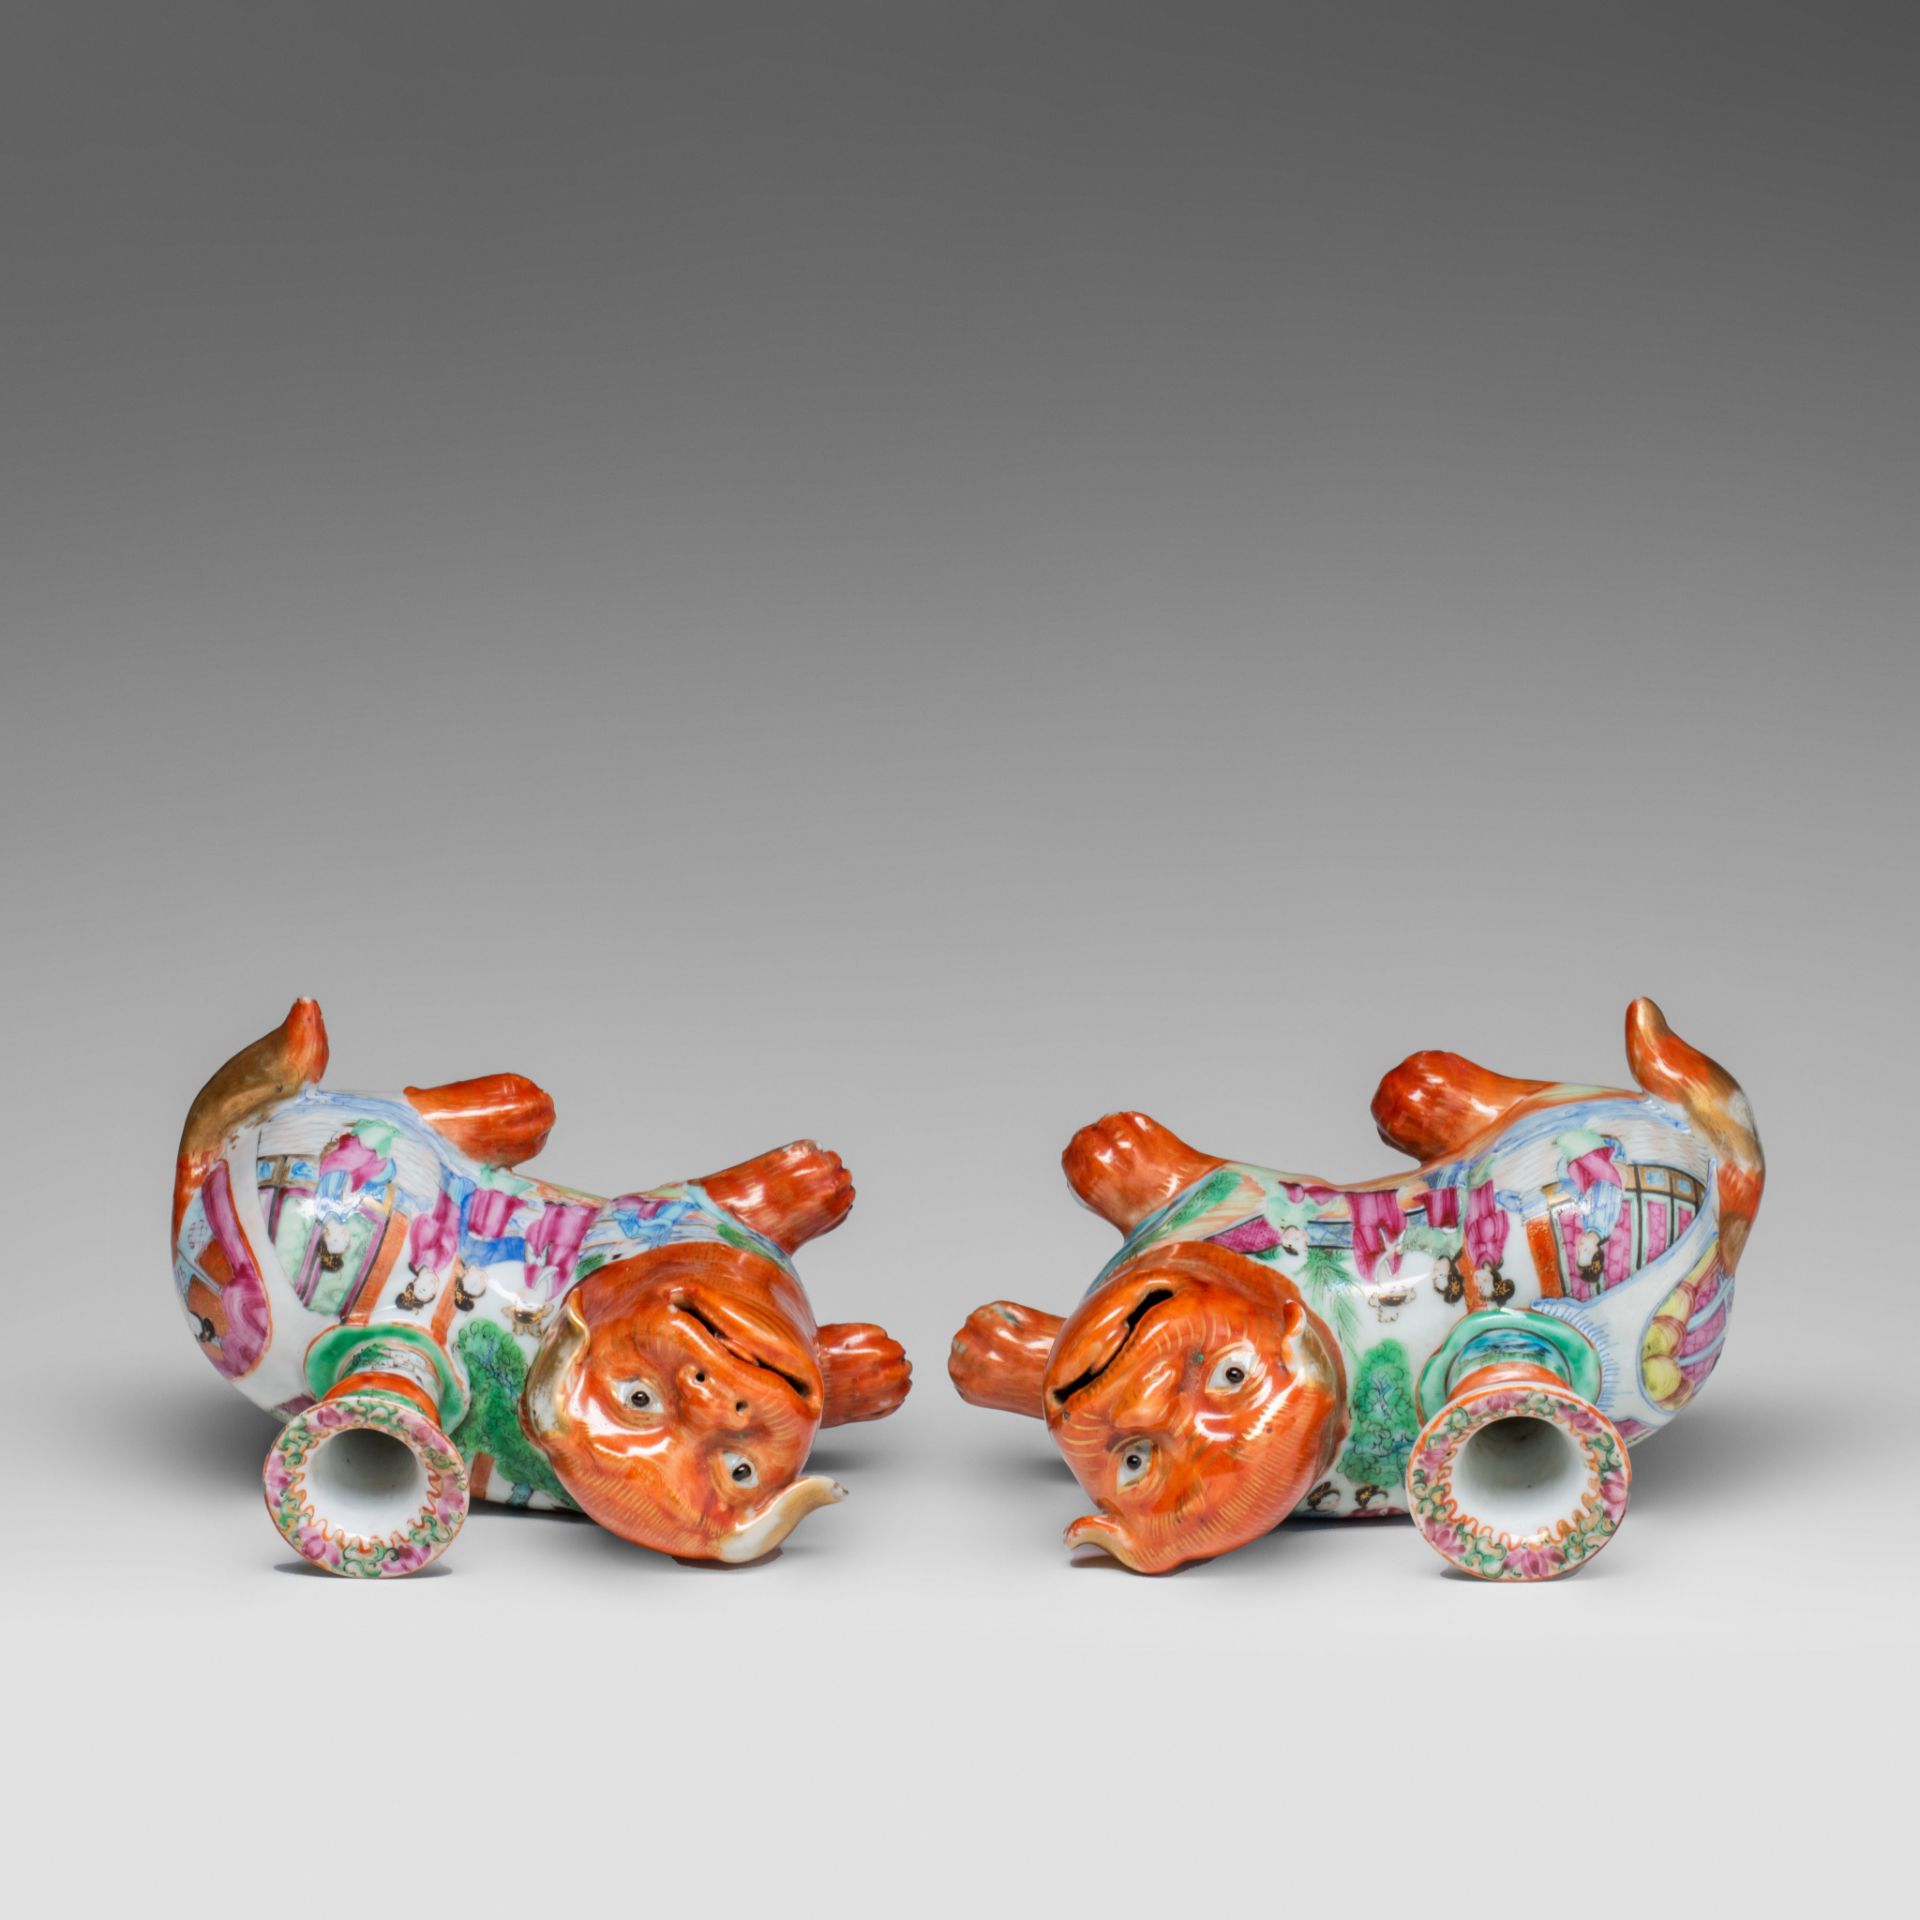 A fine pair of Chinese Canton joss stick holders in the shape of Fu dogs, 19thC, H 11,5 - L 20 cm - Image 7 of 9